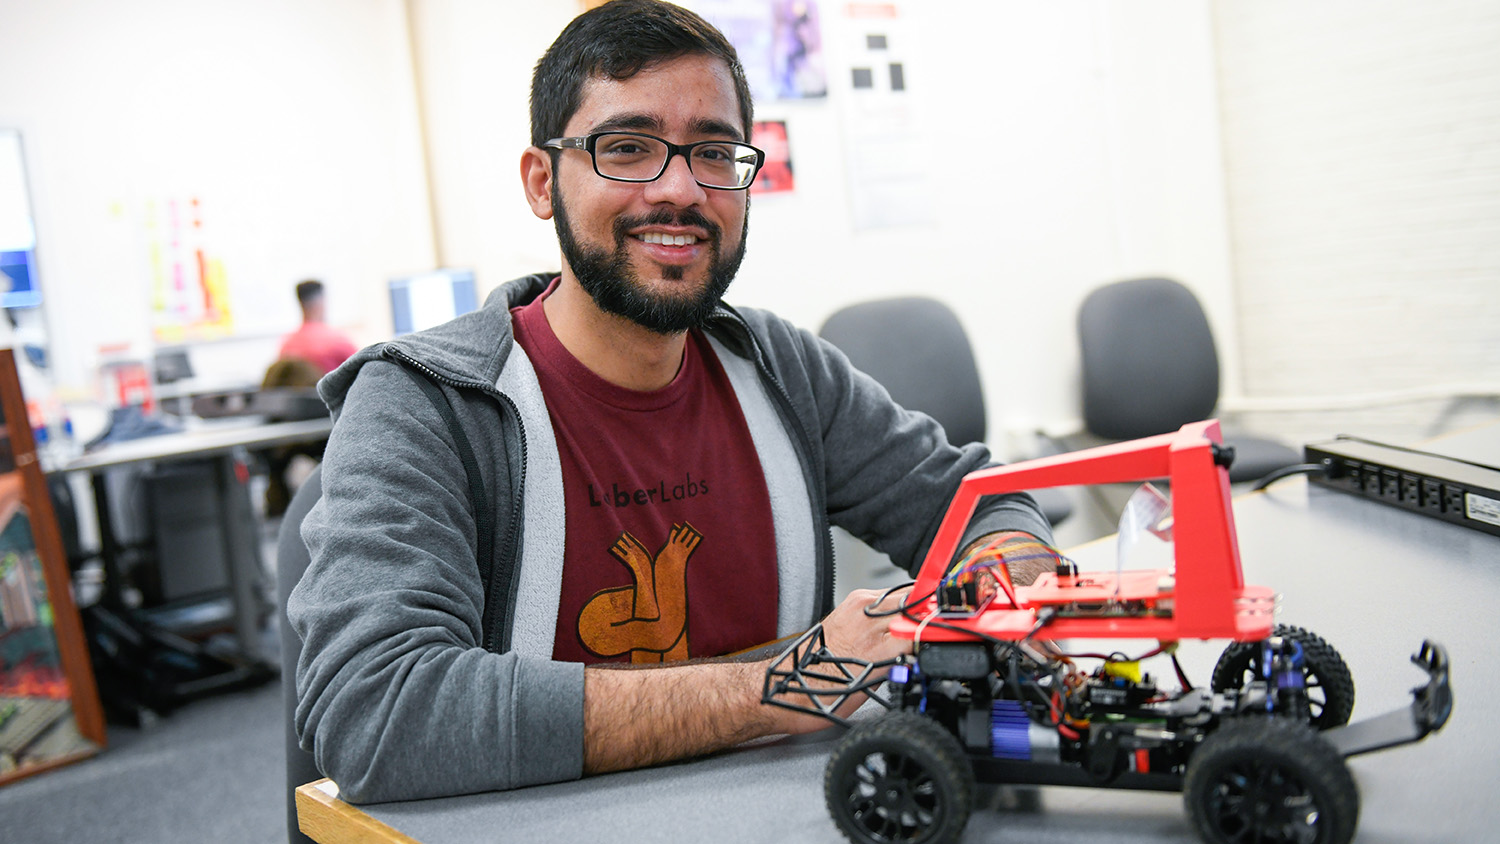 A male student sits at a table with a robotic car in front of him